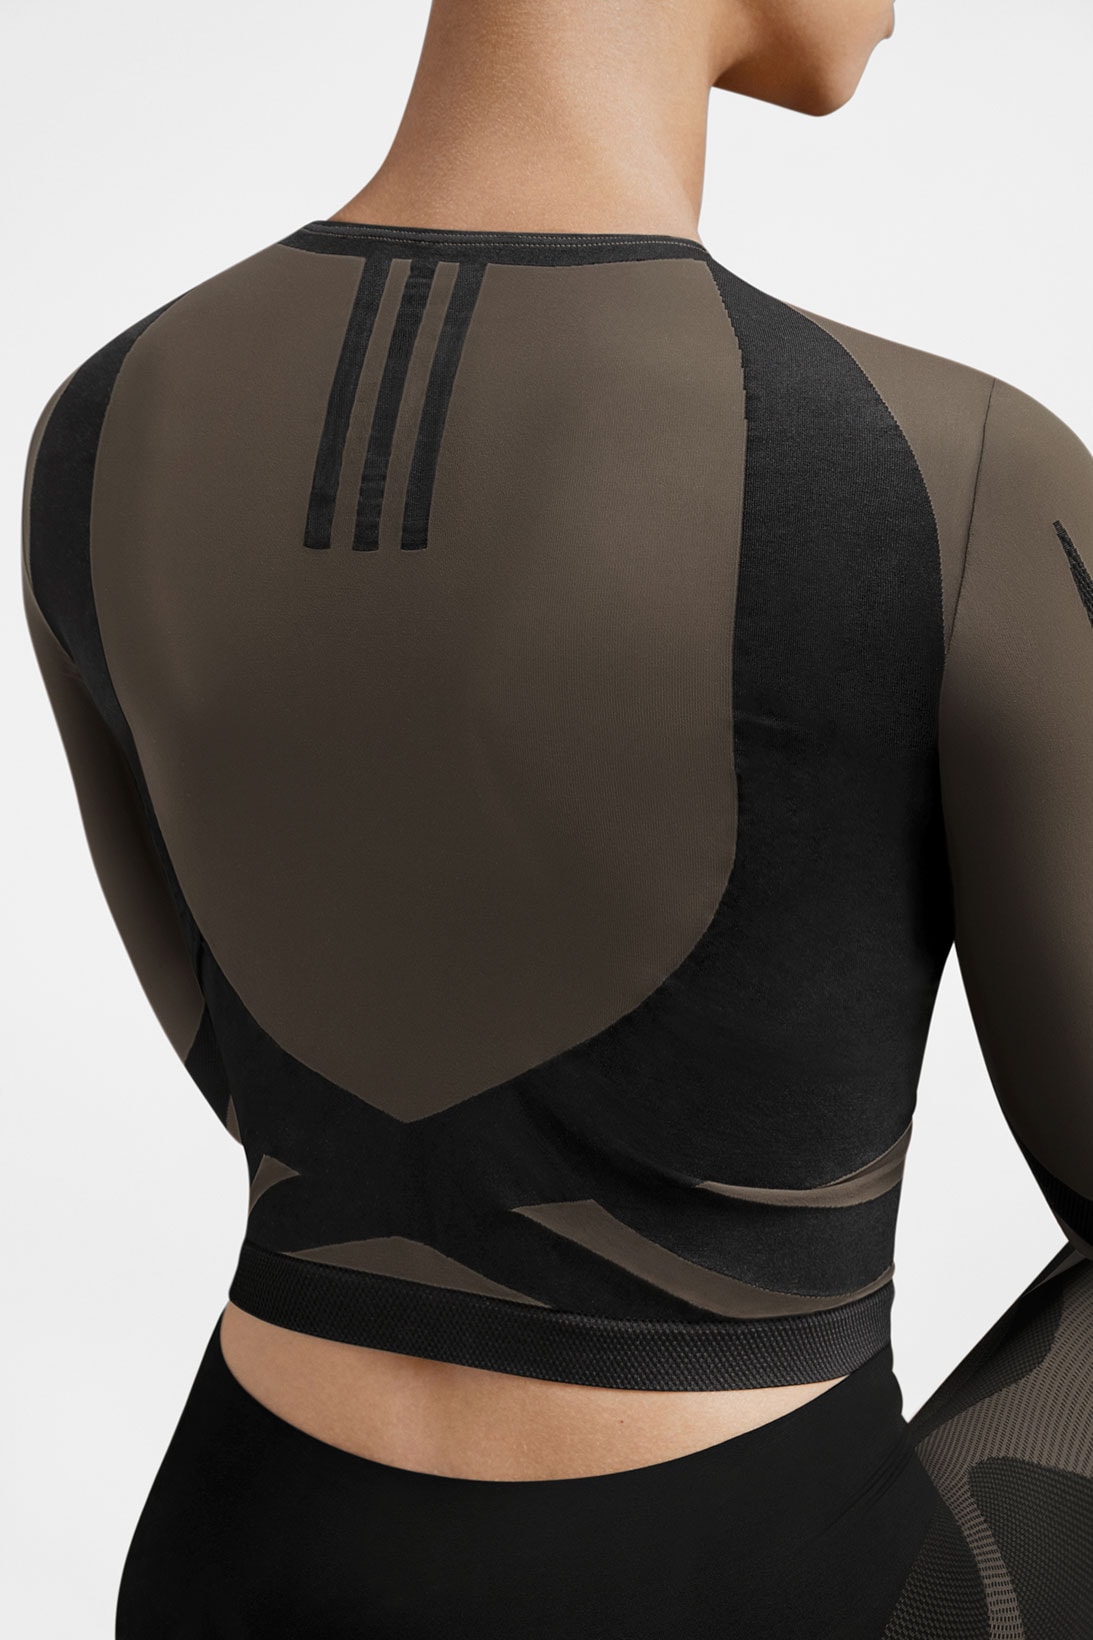 wolford adidas activewear performance collaboration seamless sheer motion crop long sleeved top back black